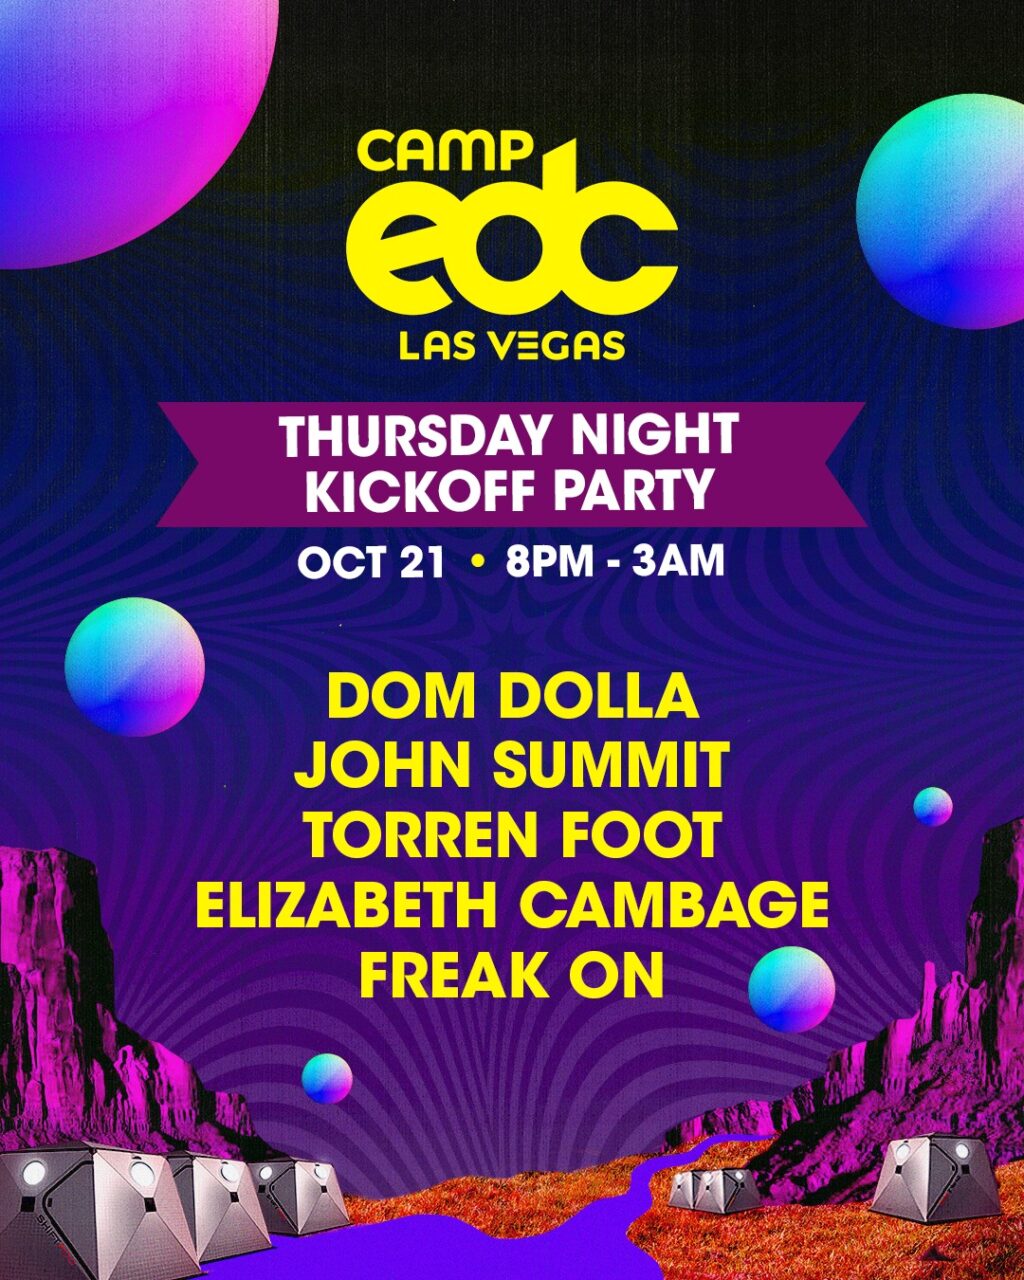 Lineup revealed for Camp EDC Kickoff Party Electronic Vegas